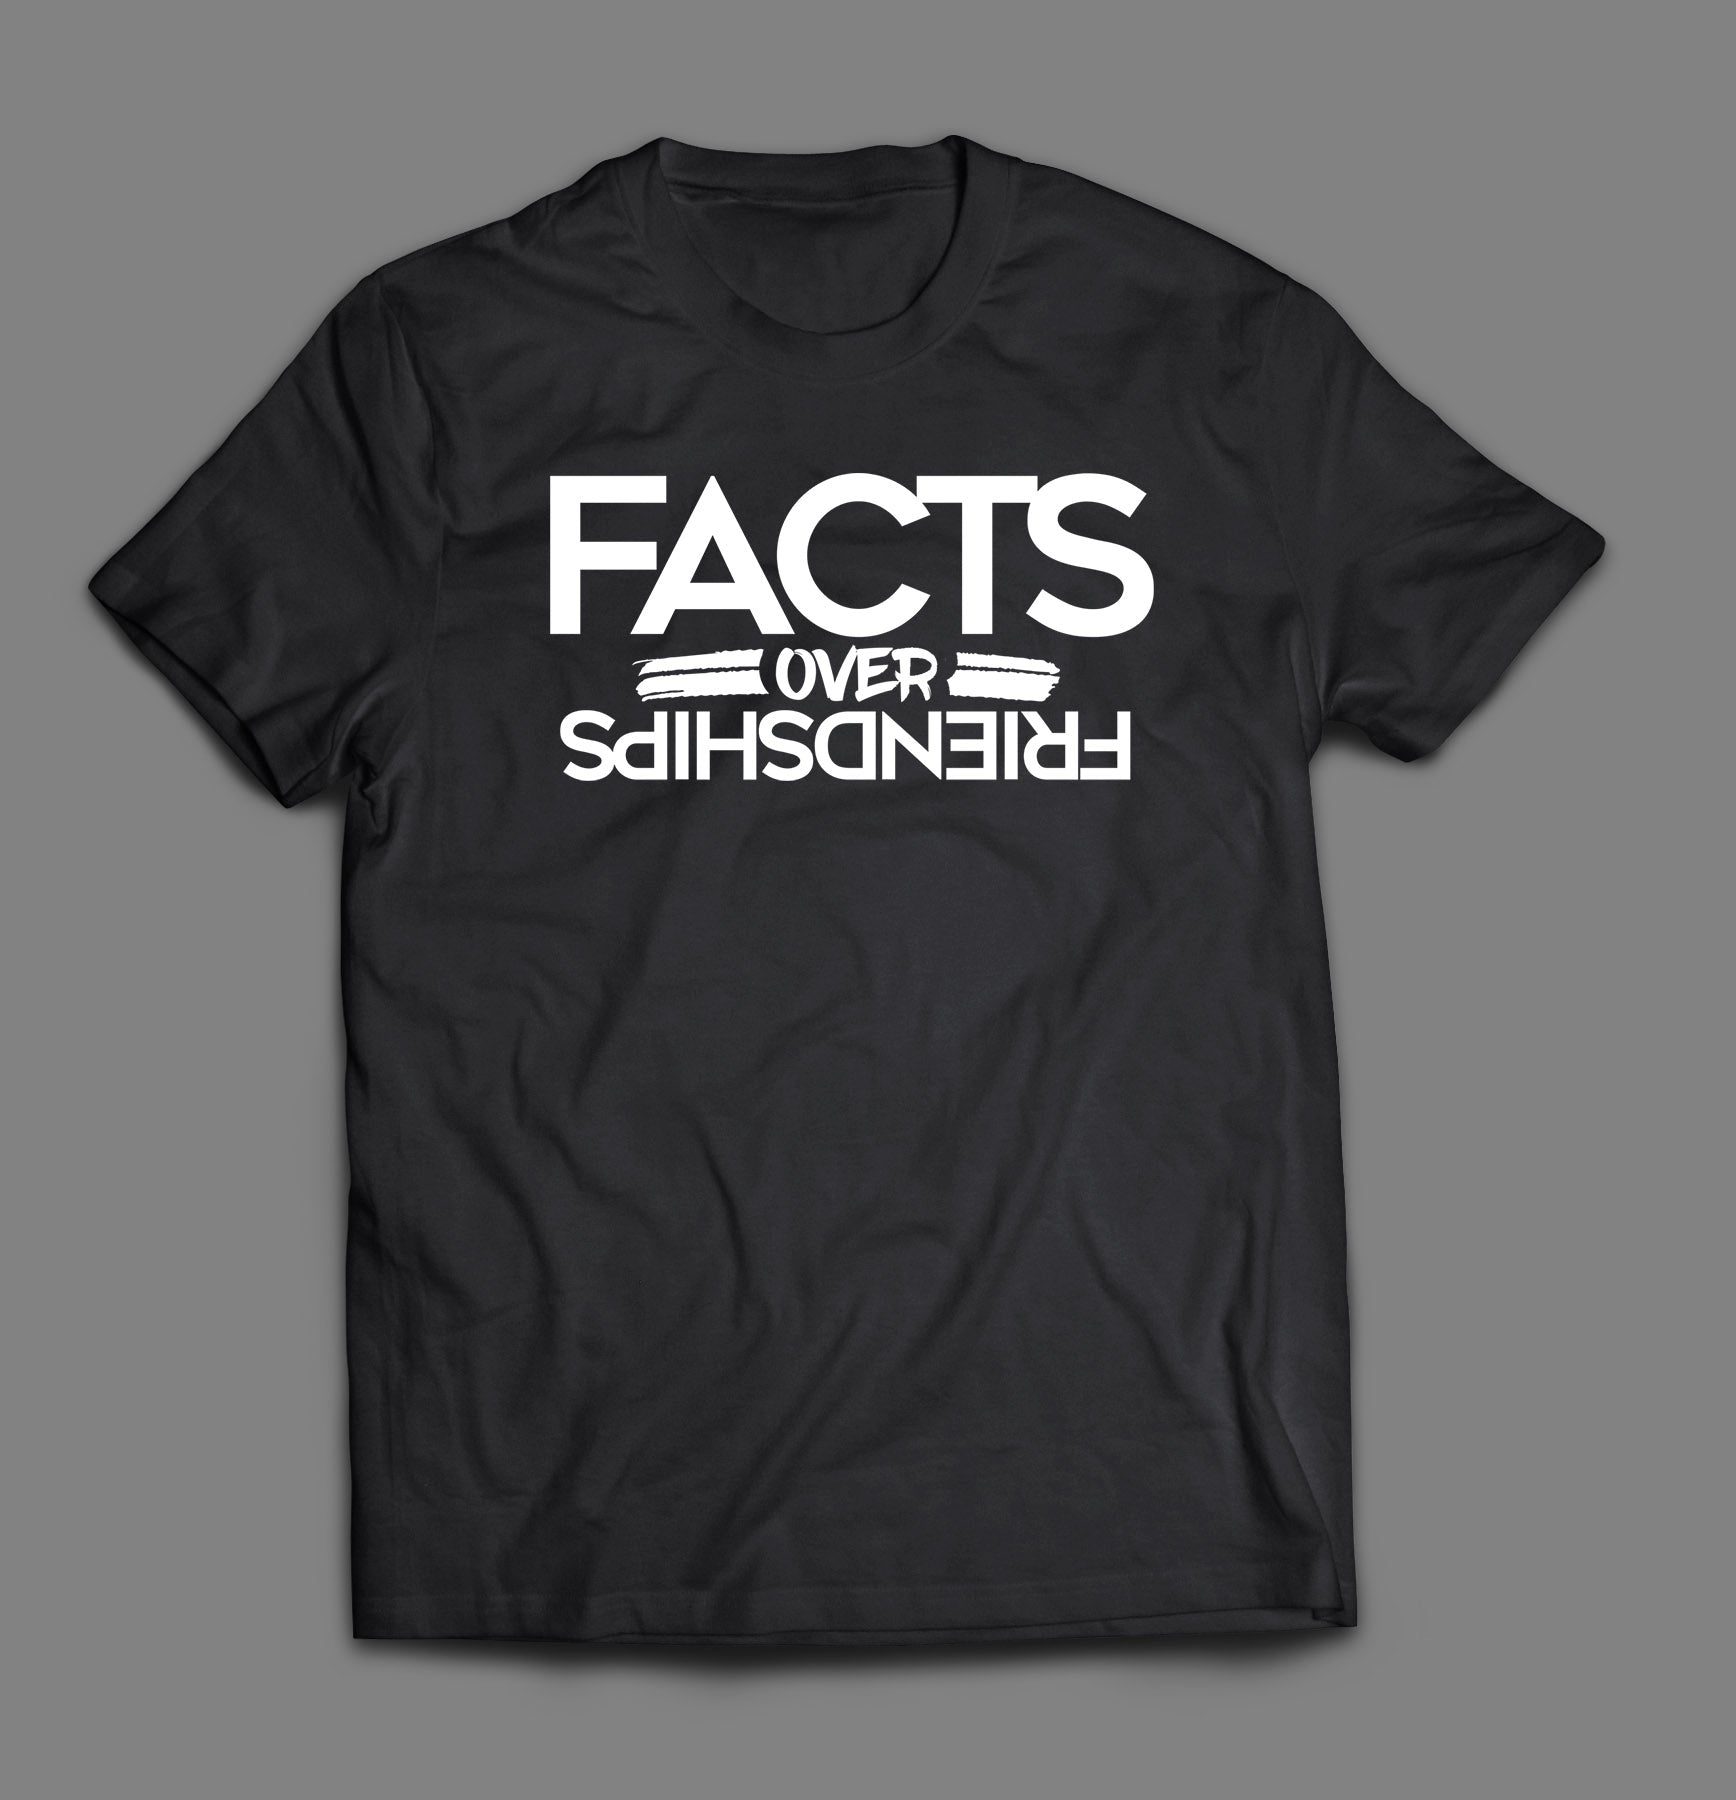 Facts Over Friendships - T-shirt